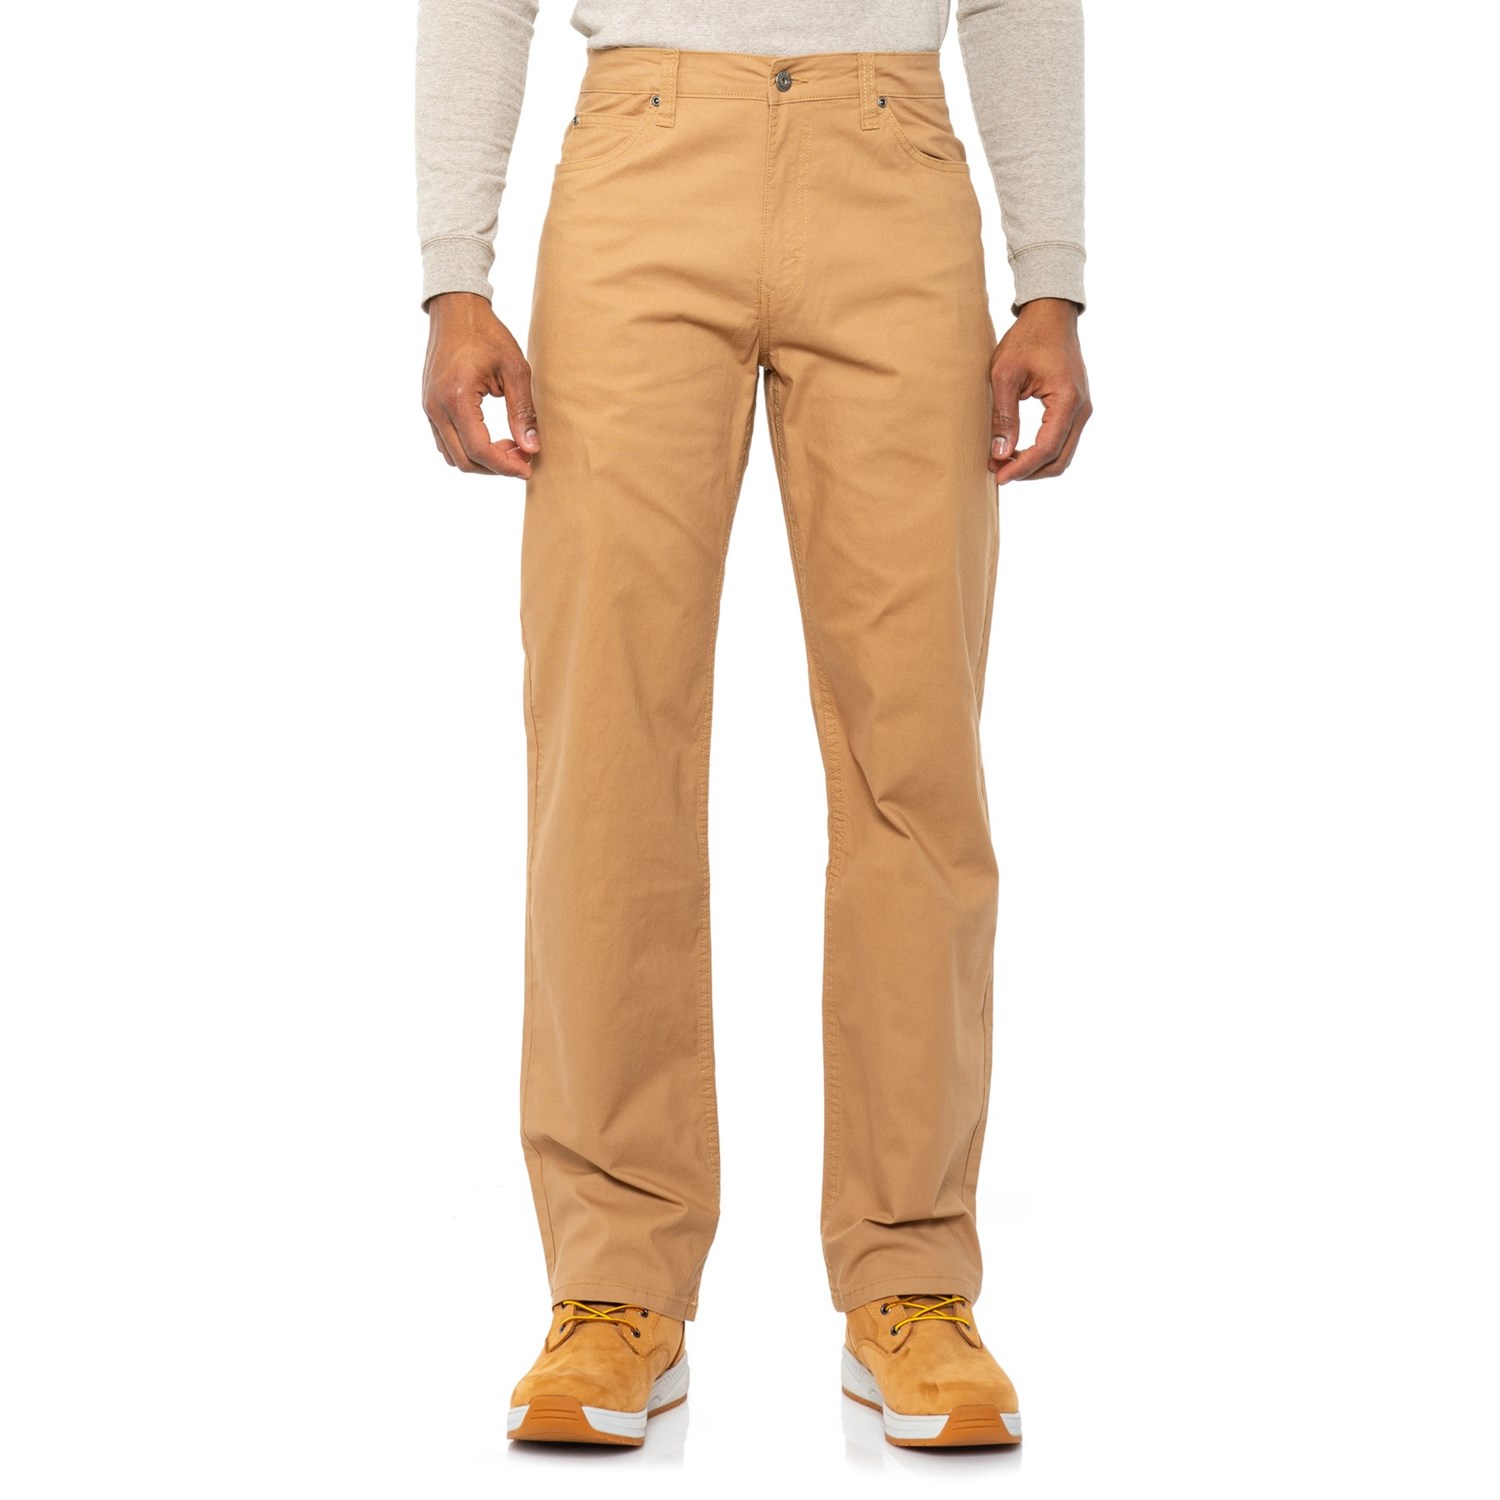 Smith's Workwear Canvas Work Pants (For Men) - Save 50%